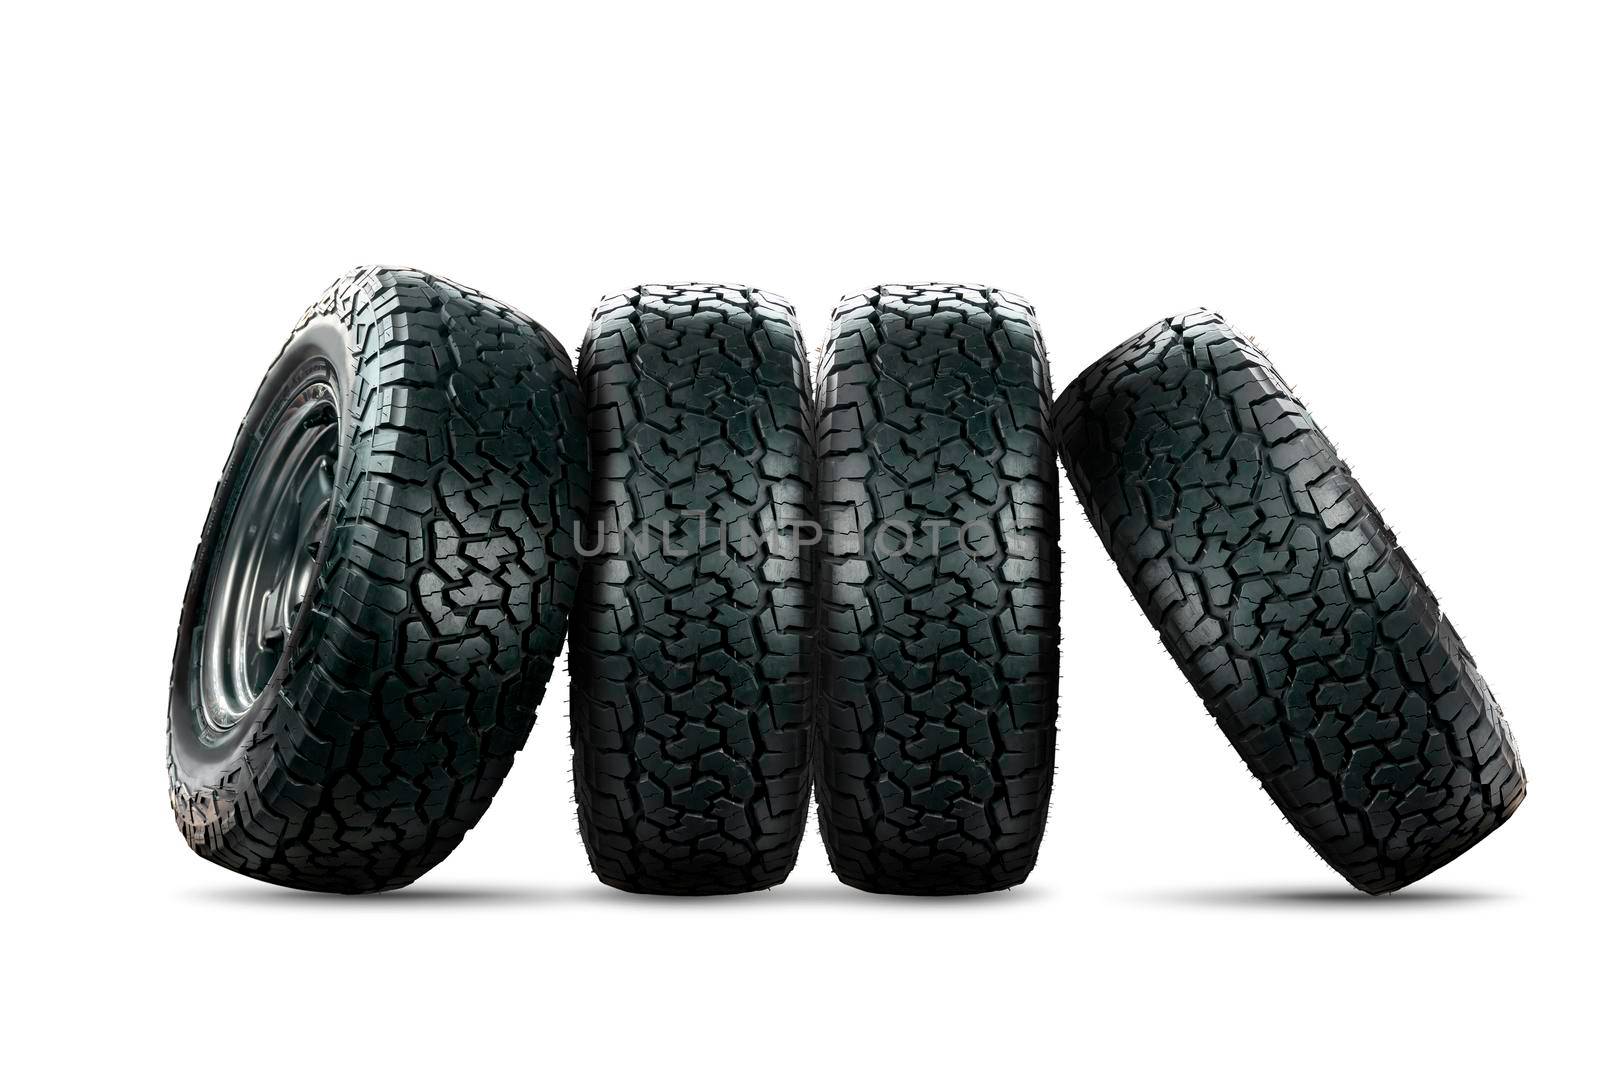 Set of 4 wheels car tires designed for use in all road conditions isolated on white background. by wattanaphob